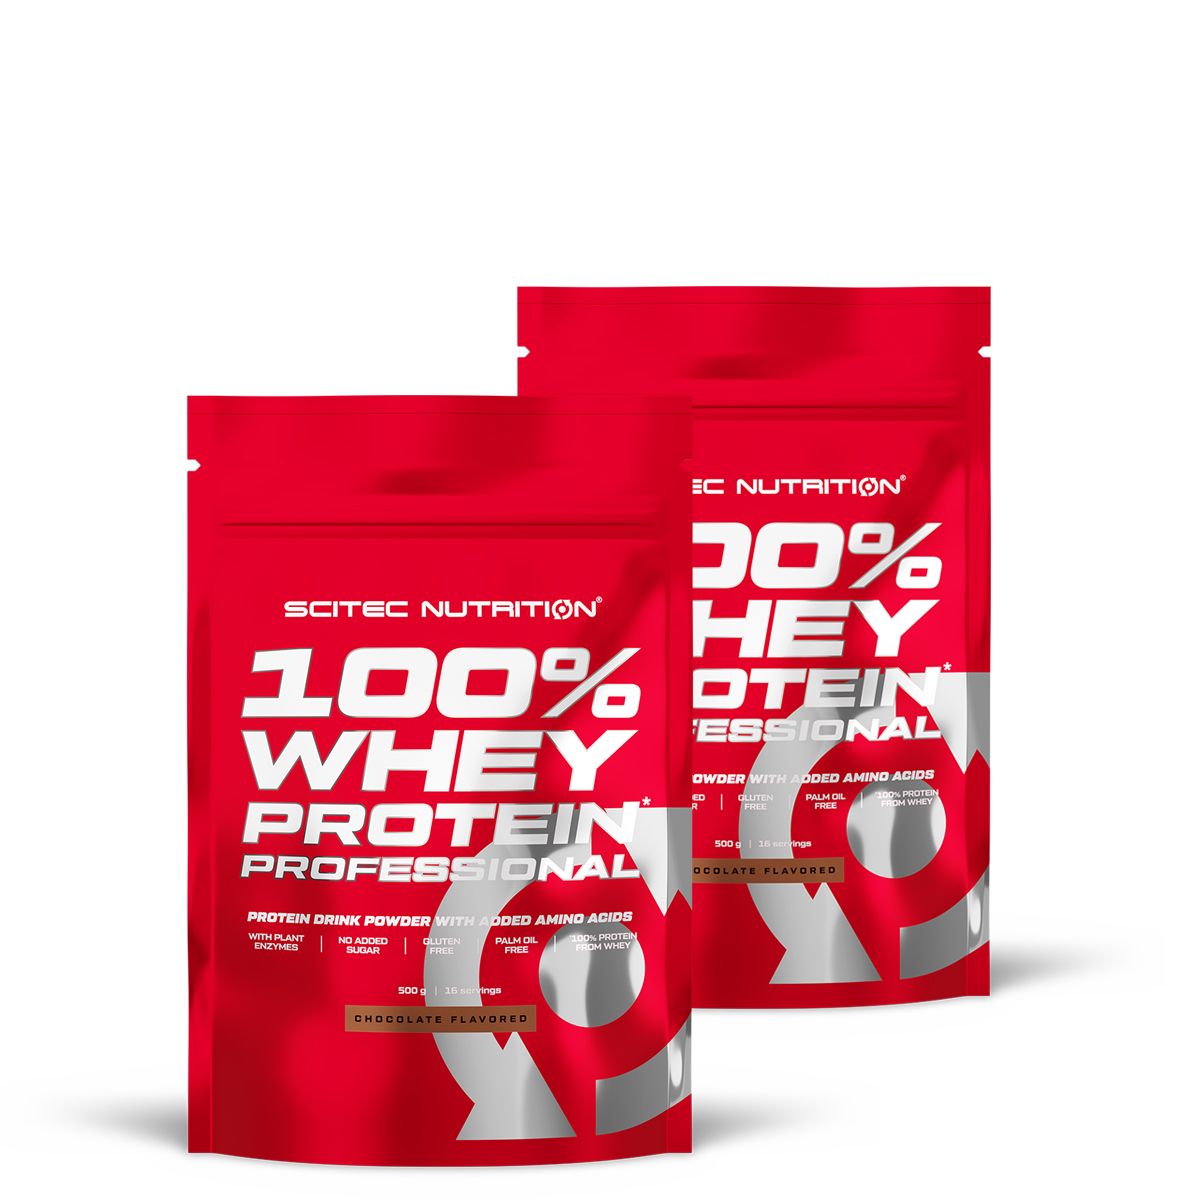 SCITEC NUTRITION - 100% WHEY PROTEIN PROFESSIONAL - 2 x 500 G